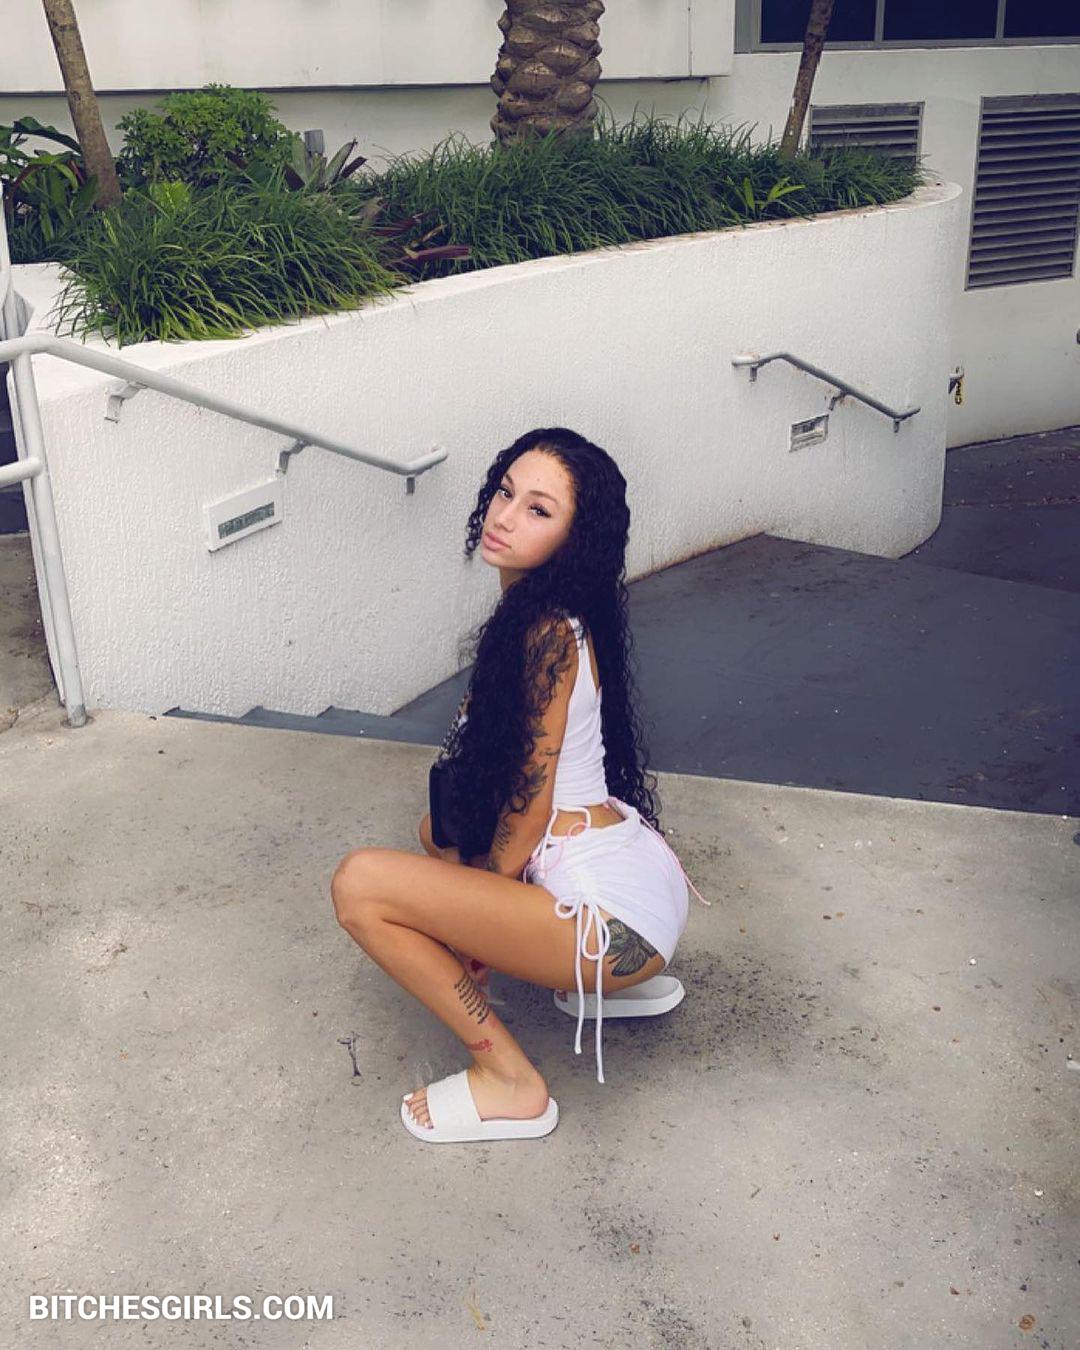 Get ready for the latest scandal with social media sensation Danielle Bregoli! Private photos have been leaked, showing the influencer in lingerie and flashing her assets. Check out the exclusive content on leakwiki for all the NSFW details. Are you familiar with Danielle's real name? She may be F18+, but do you know her actual age? Dive into the world of Thots Bregoli and get a glimpse into her wild side.